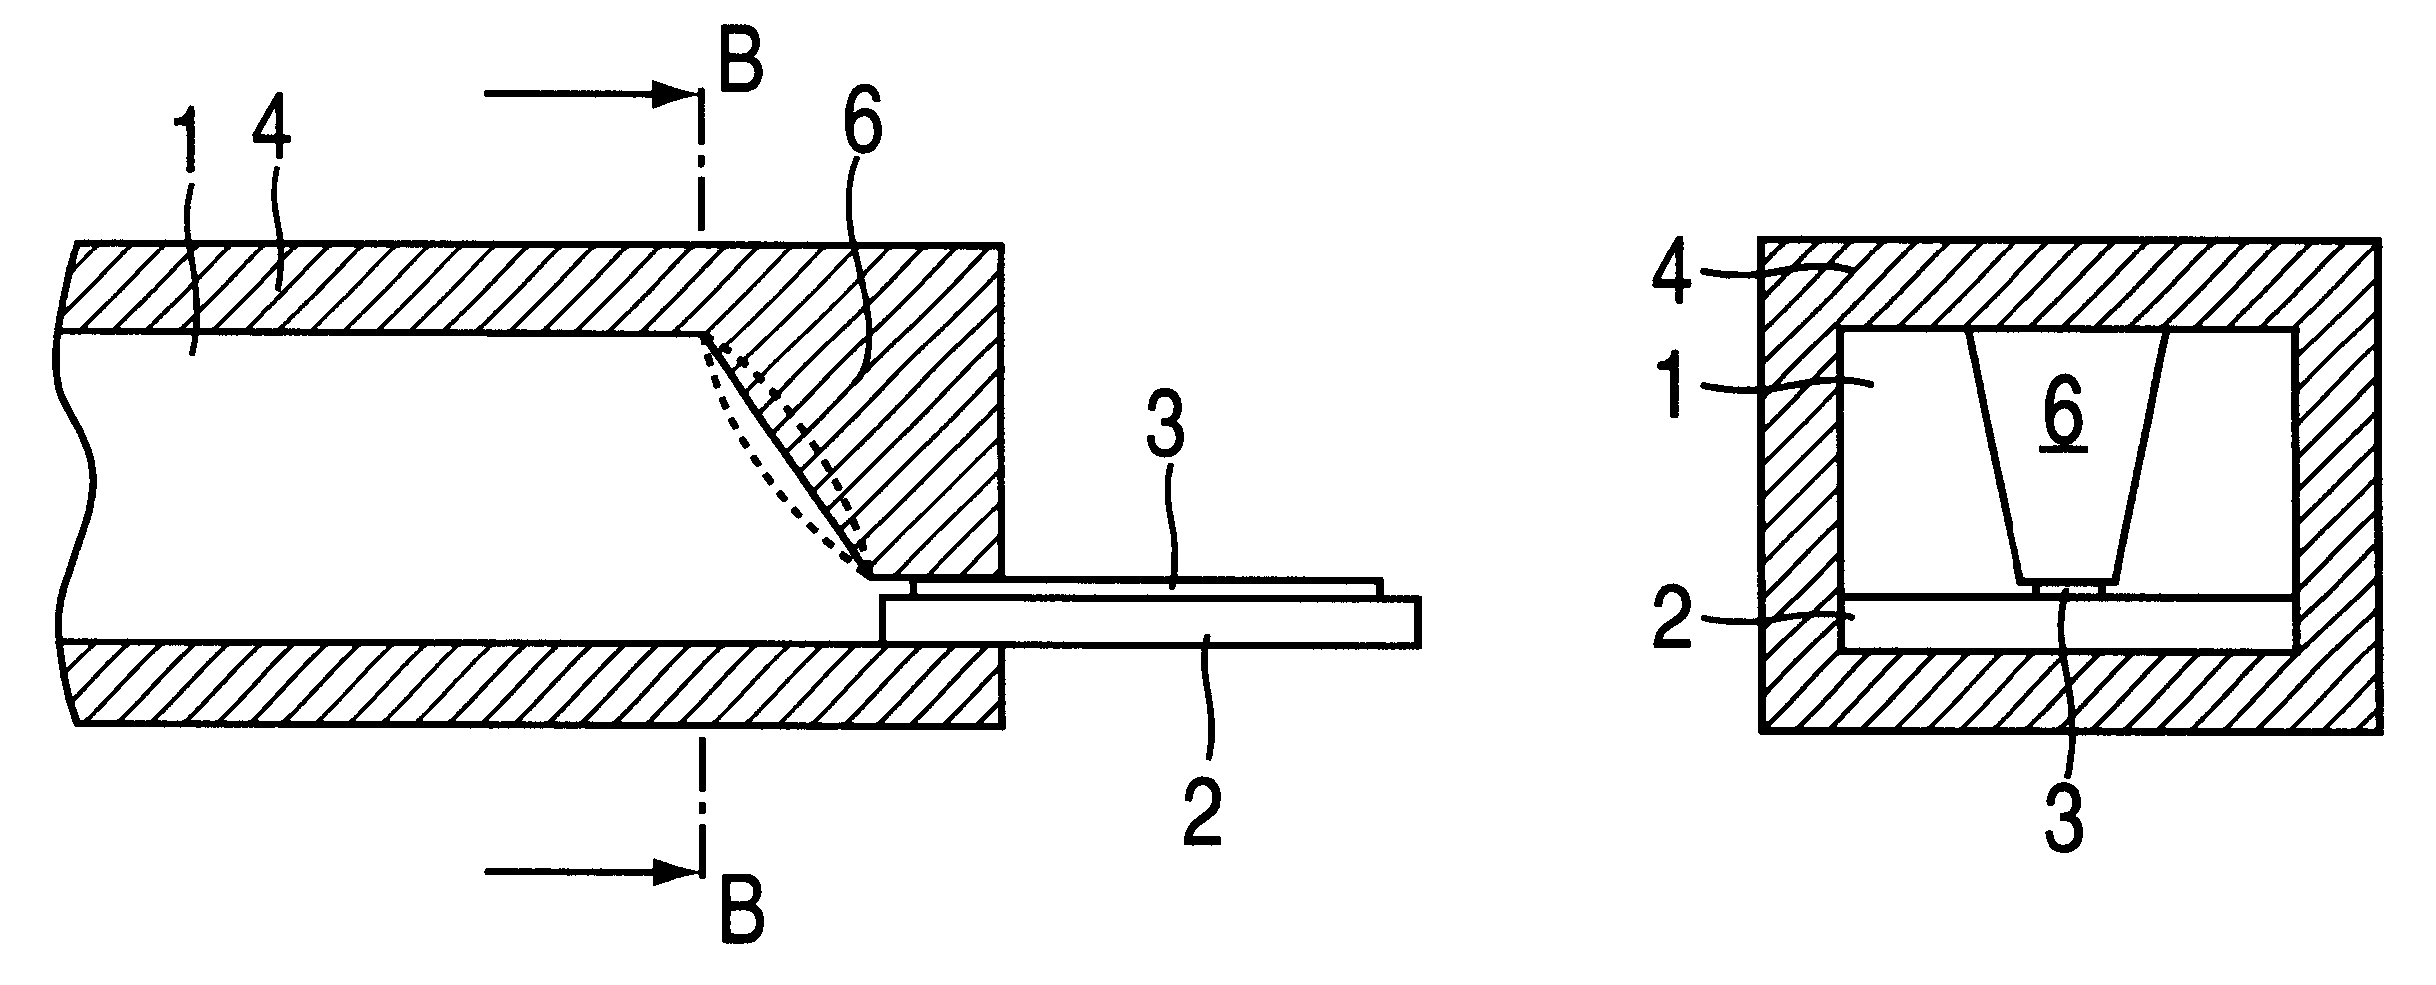 Transition from a waveguide to a strip transmission line